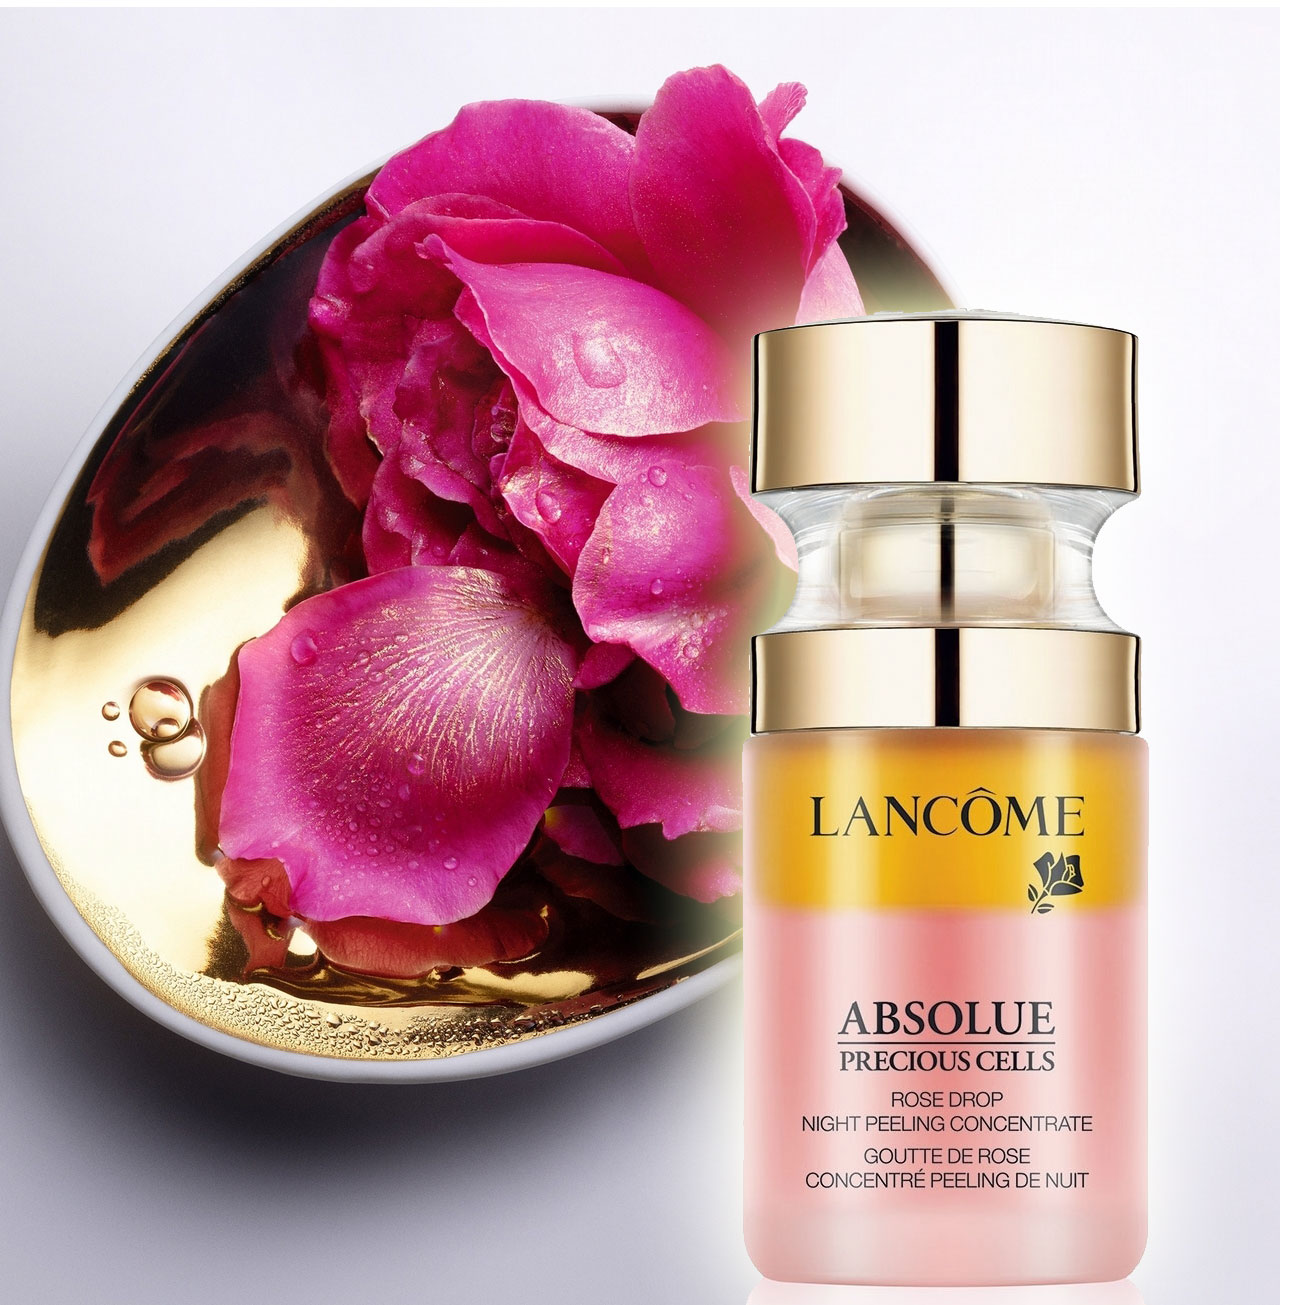 Absolue Precious Cells Rose Drop Night Peeling Concentrate sản phẩm